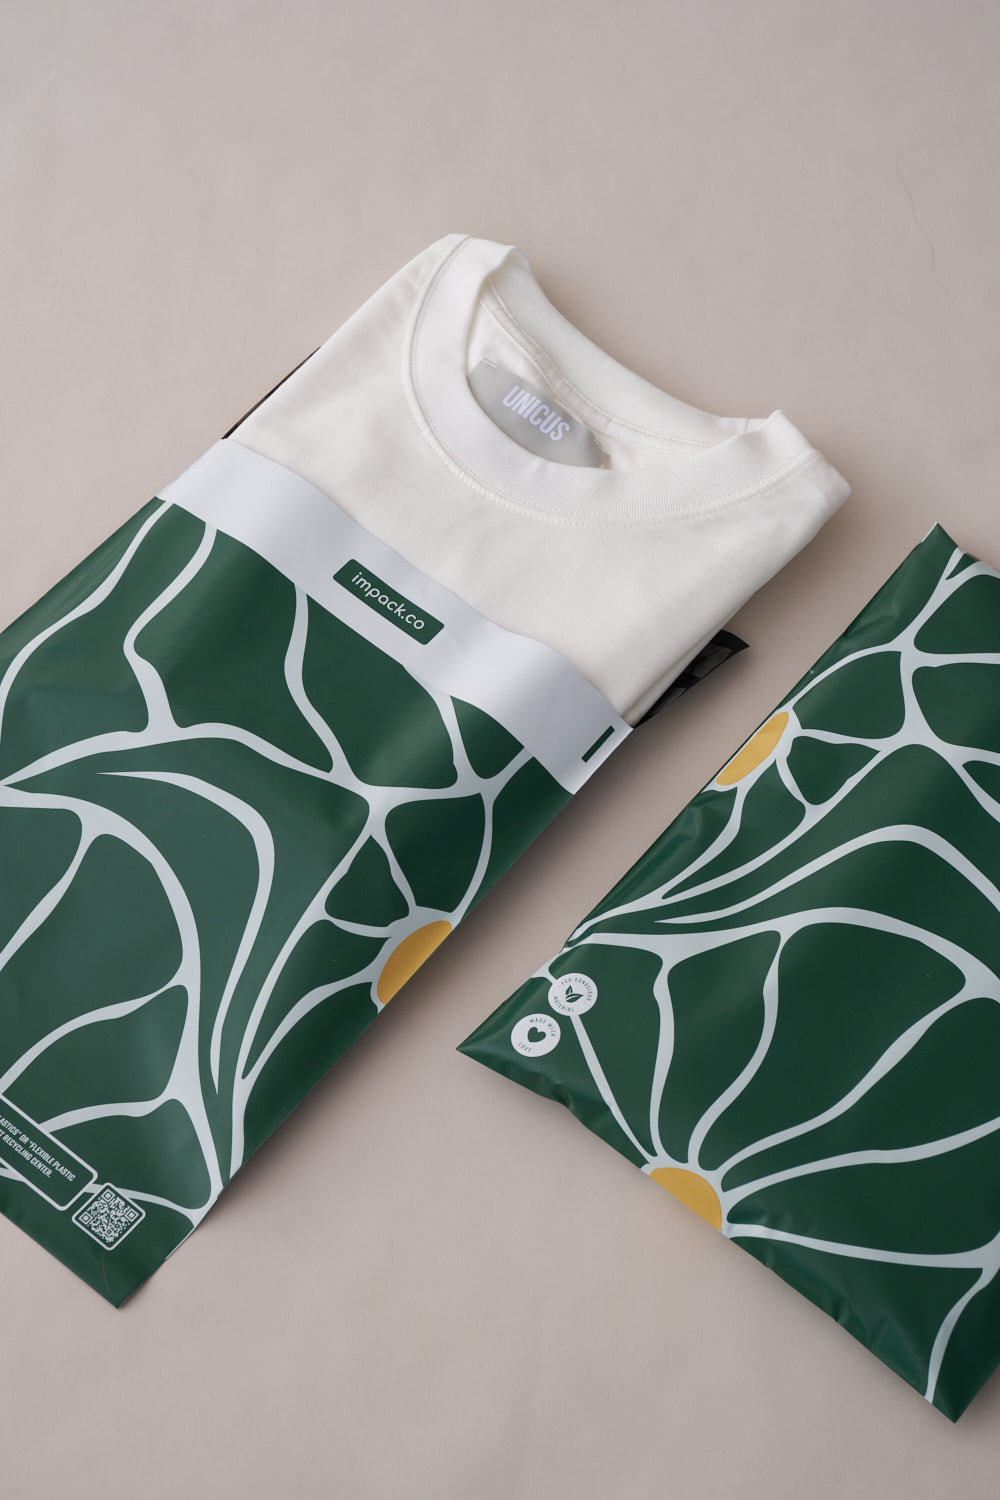 A white T-shirt neatly folded inside green packaging with a white and yellow floral design, ensuring transit protection. Another similar versatile Forest Grove Mailers 10" x 13" by impack.co is next to it.